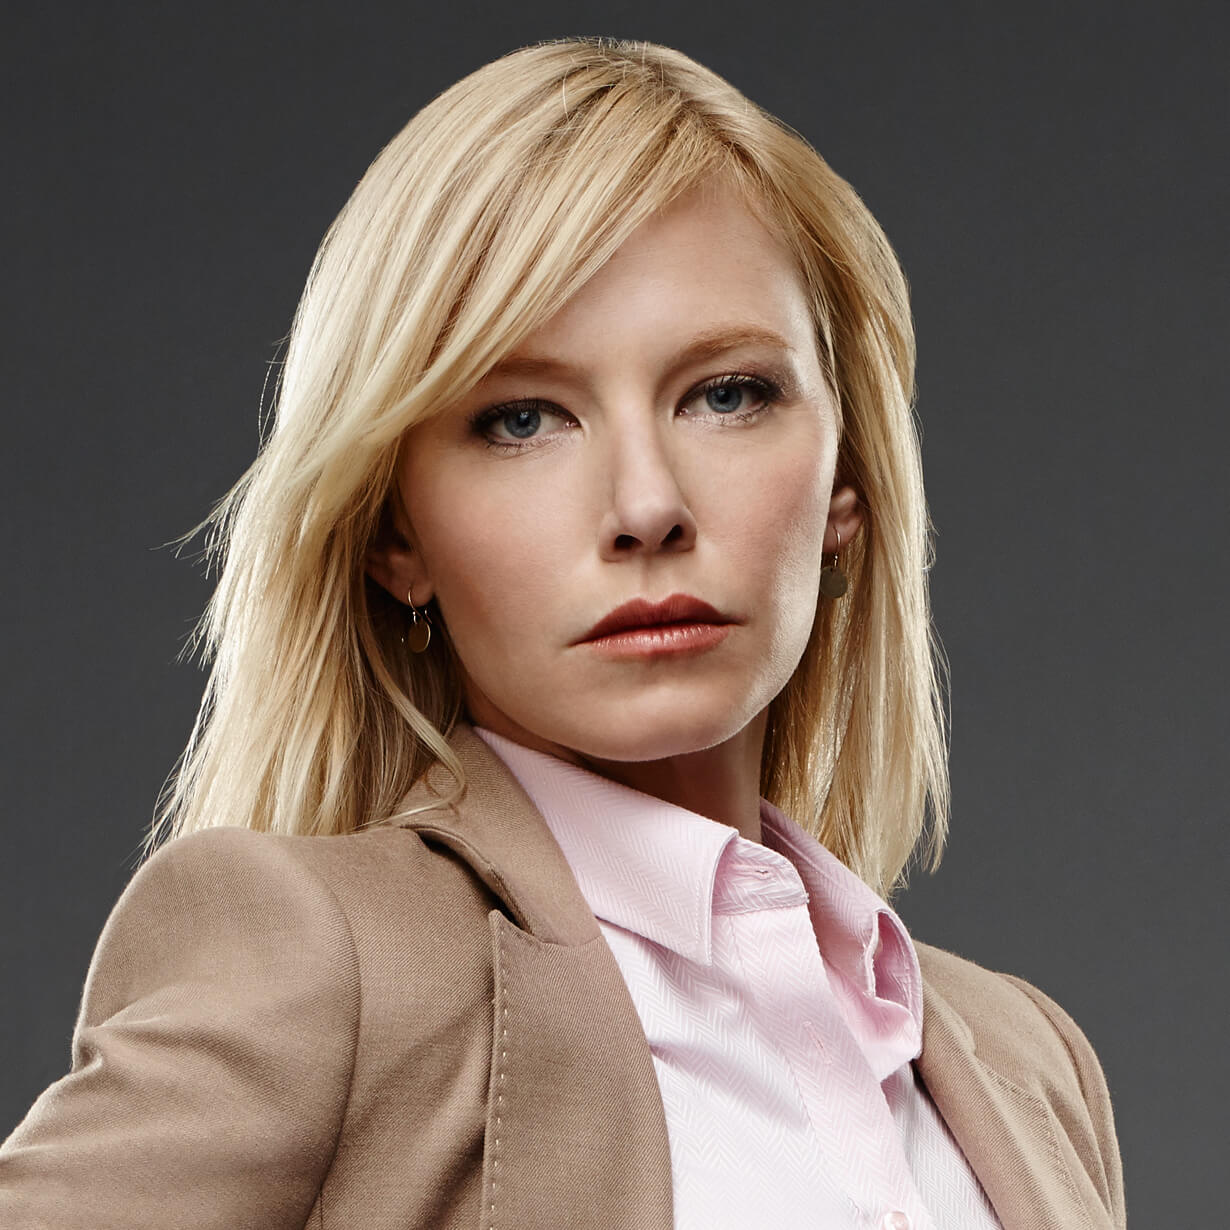 60+ Hot Pictures Of Kelli Giddish Are Just Too Yum For Her Fans 14